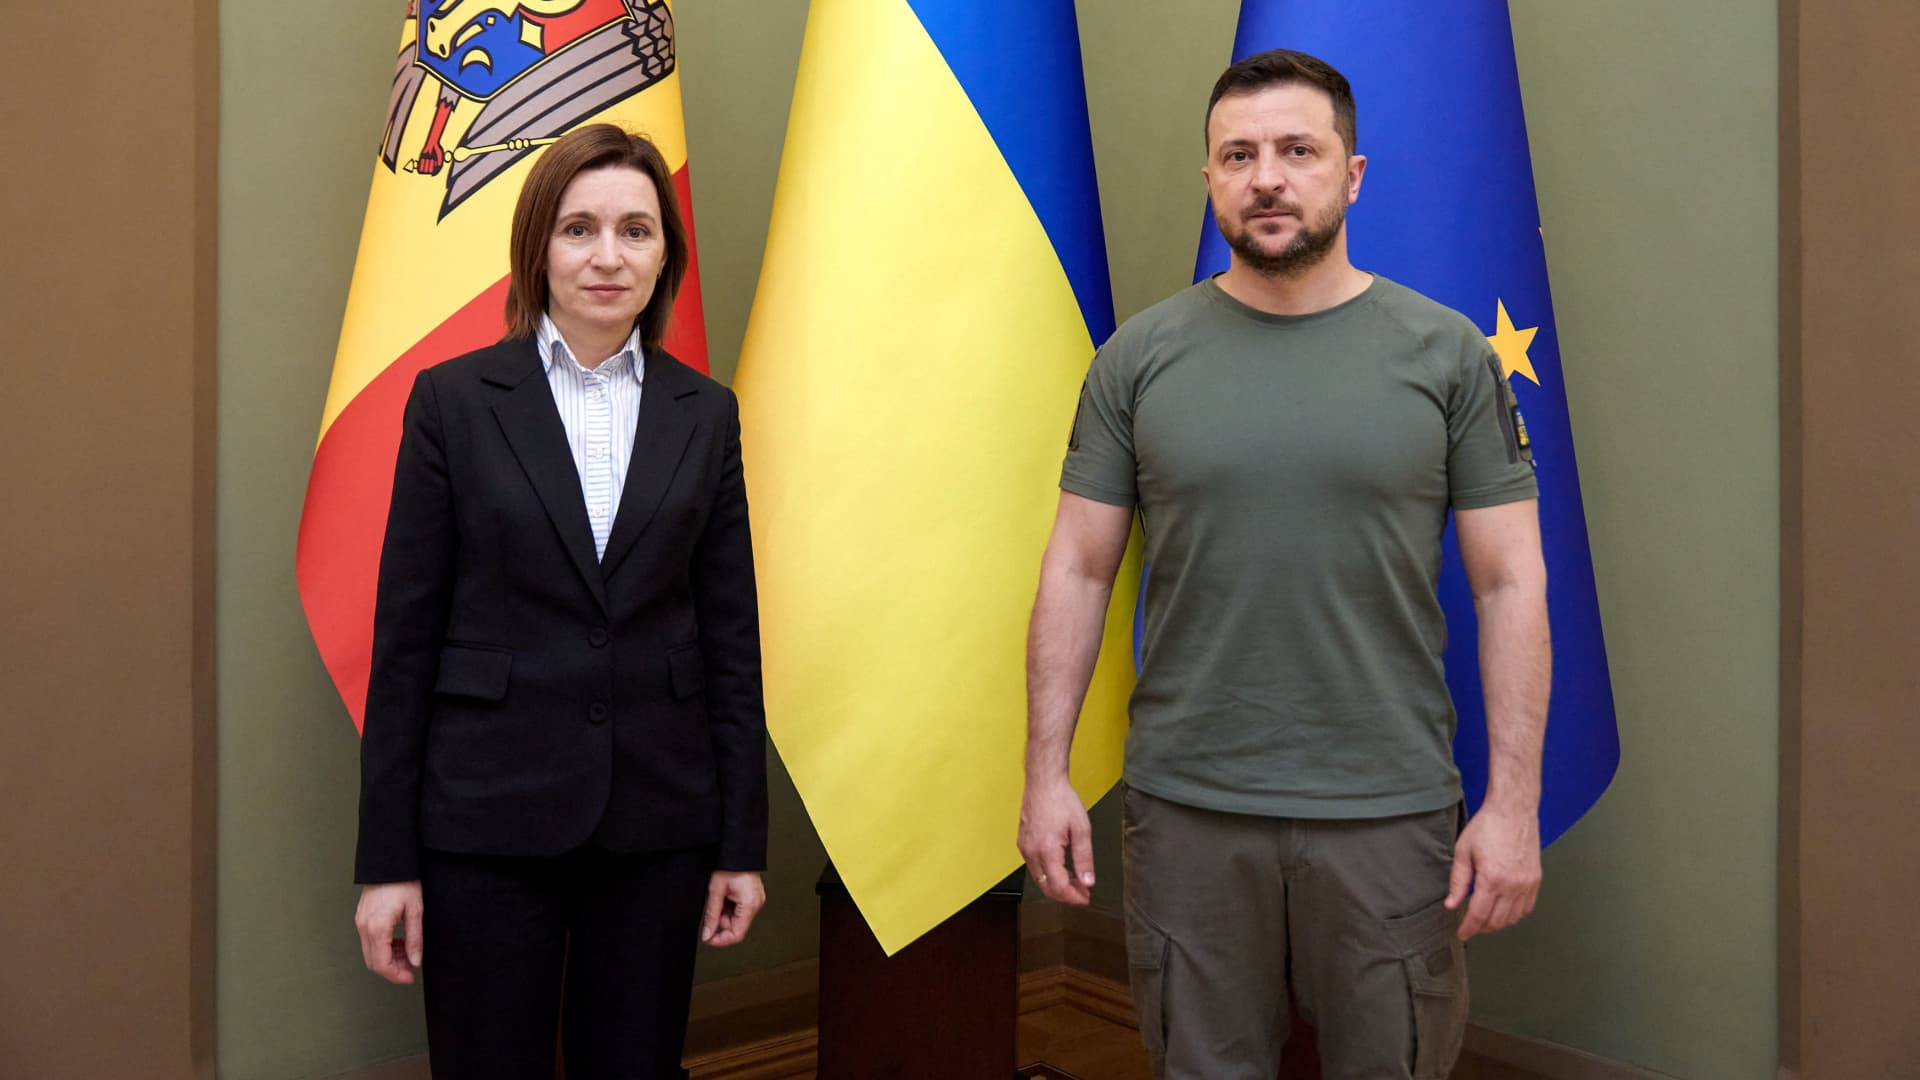 Moldova's President Maia Sandu and Ukraine's President Volodymyr Zelenskyy pose for a picture during a meeting in Kyiv, Ukraine, on June 27, 2022.